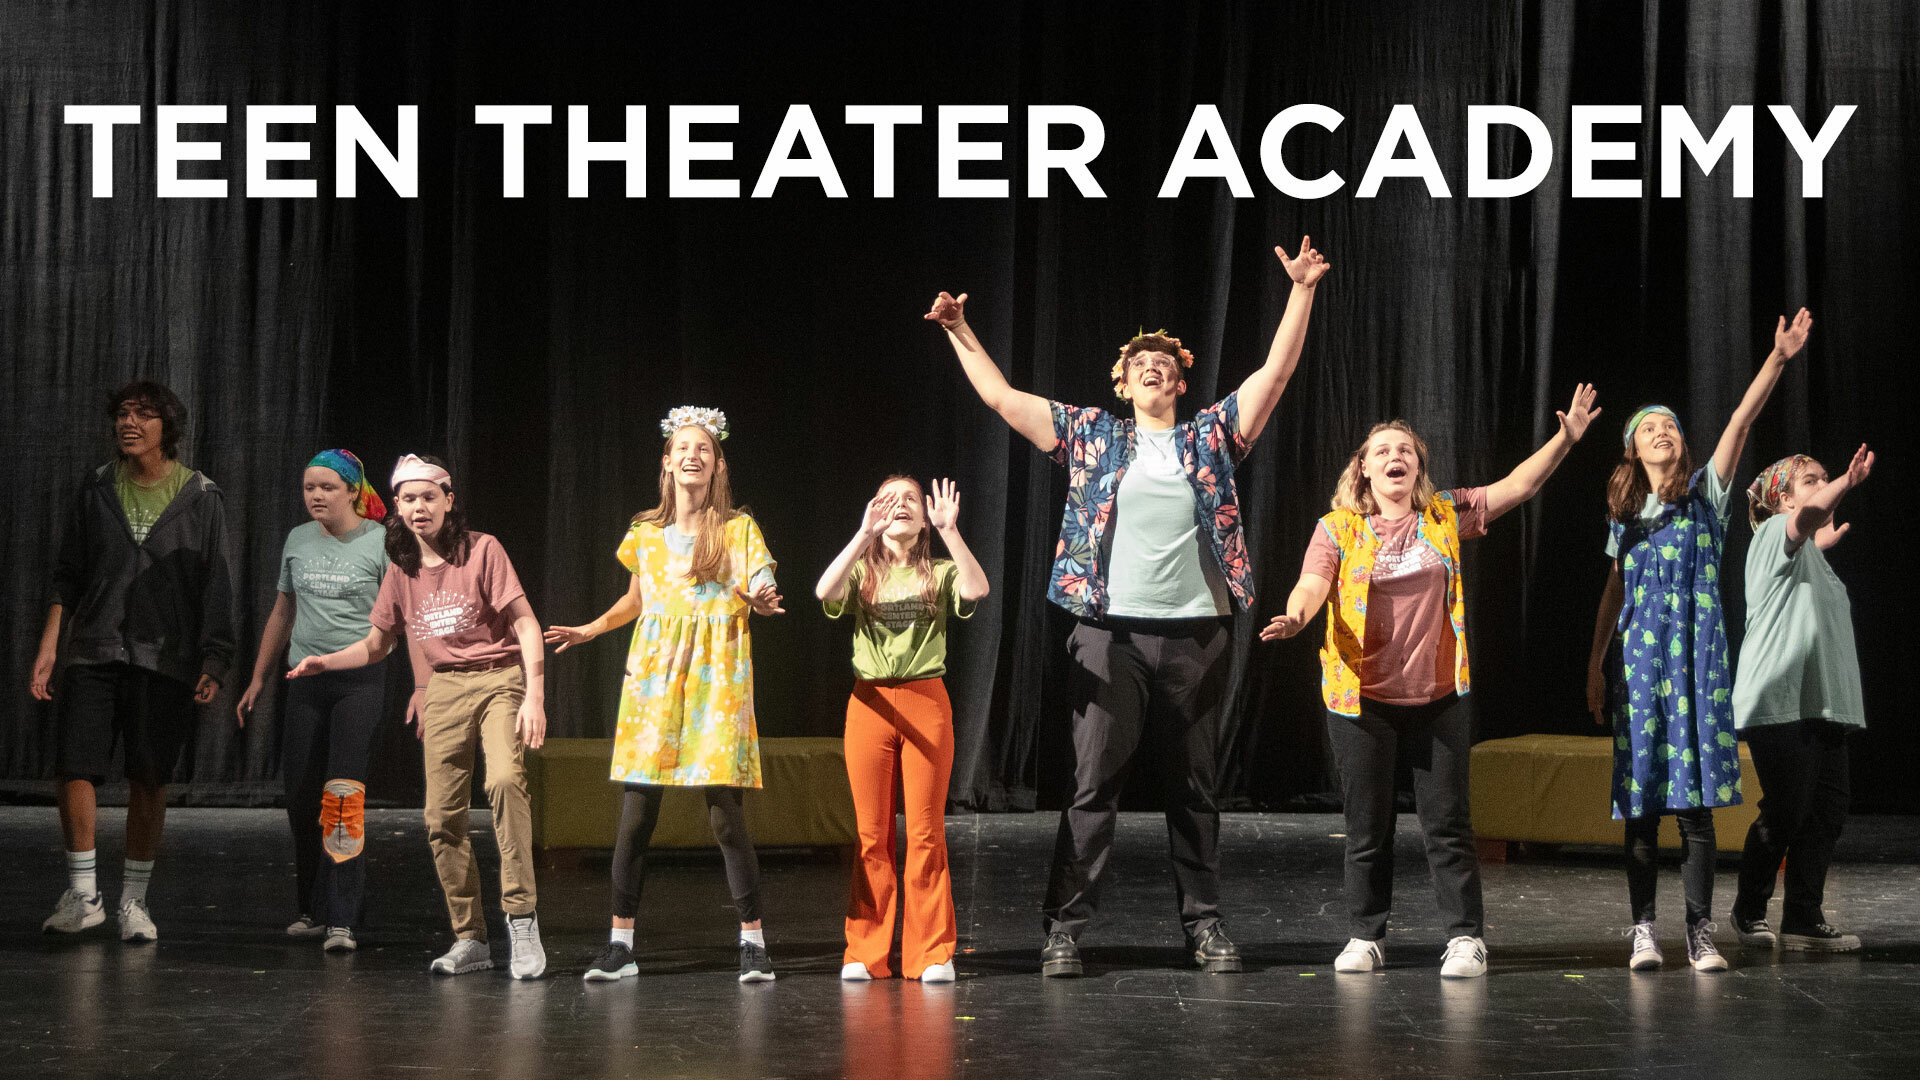 A lineup of several students performing on stage, some with arms raised, under the words "Teen Theater Academy."